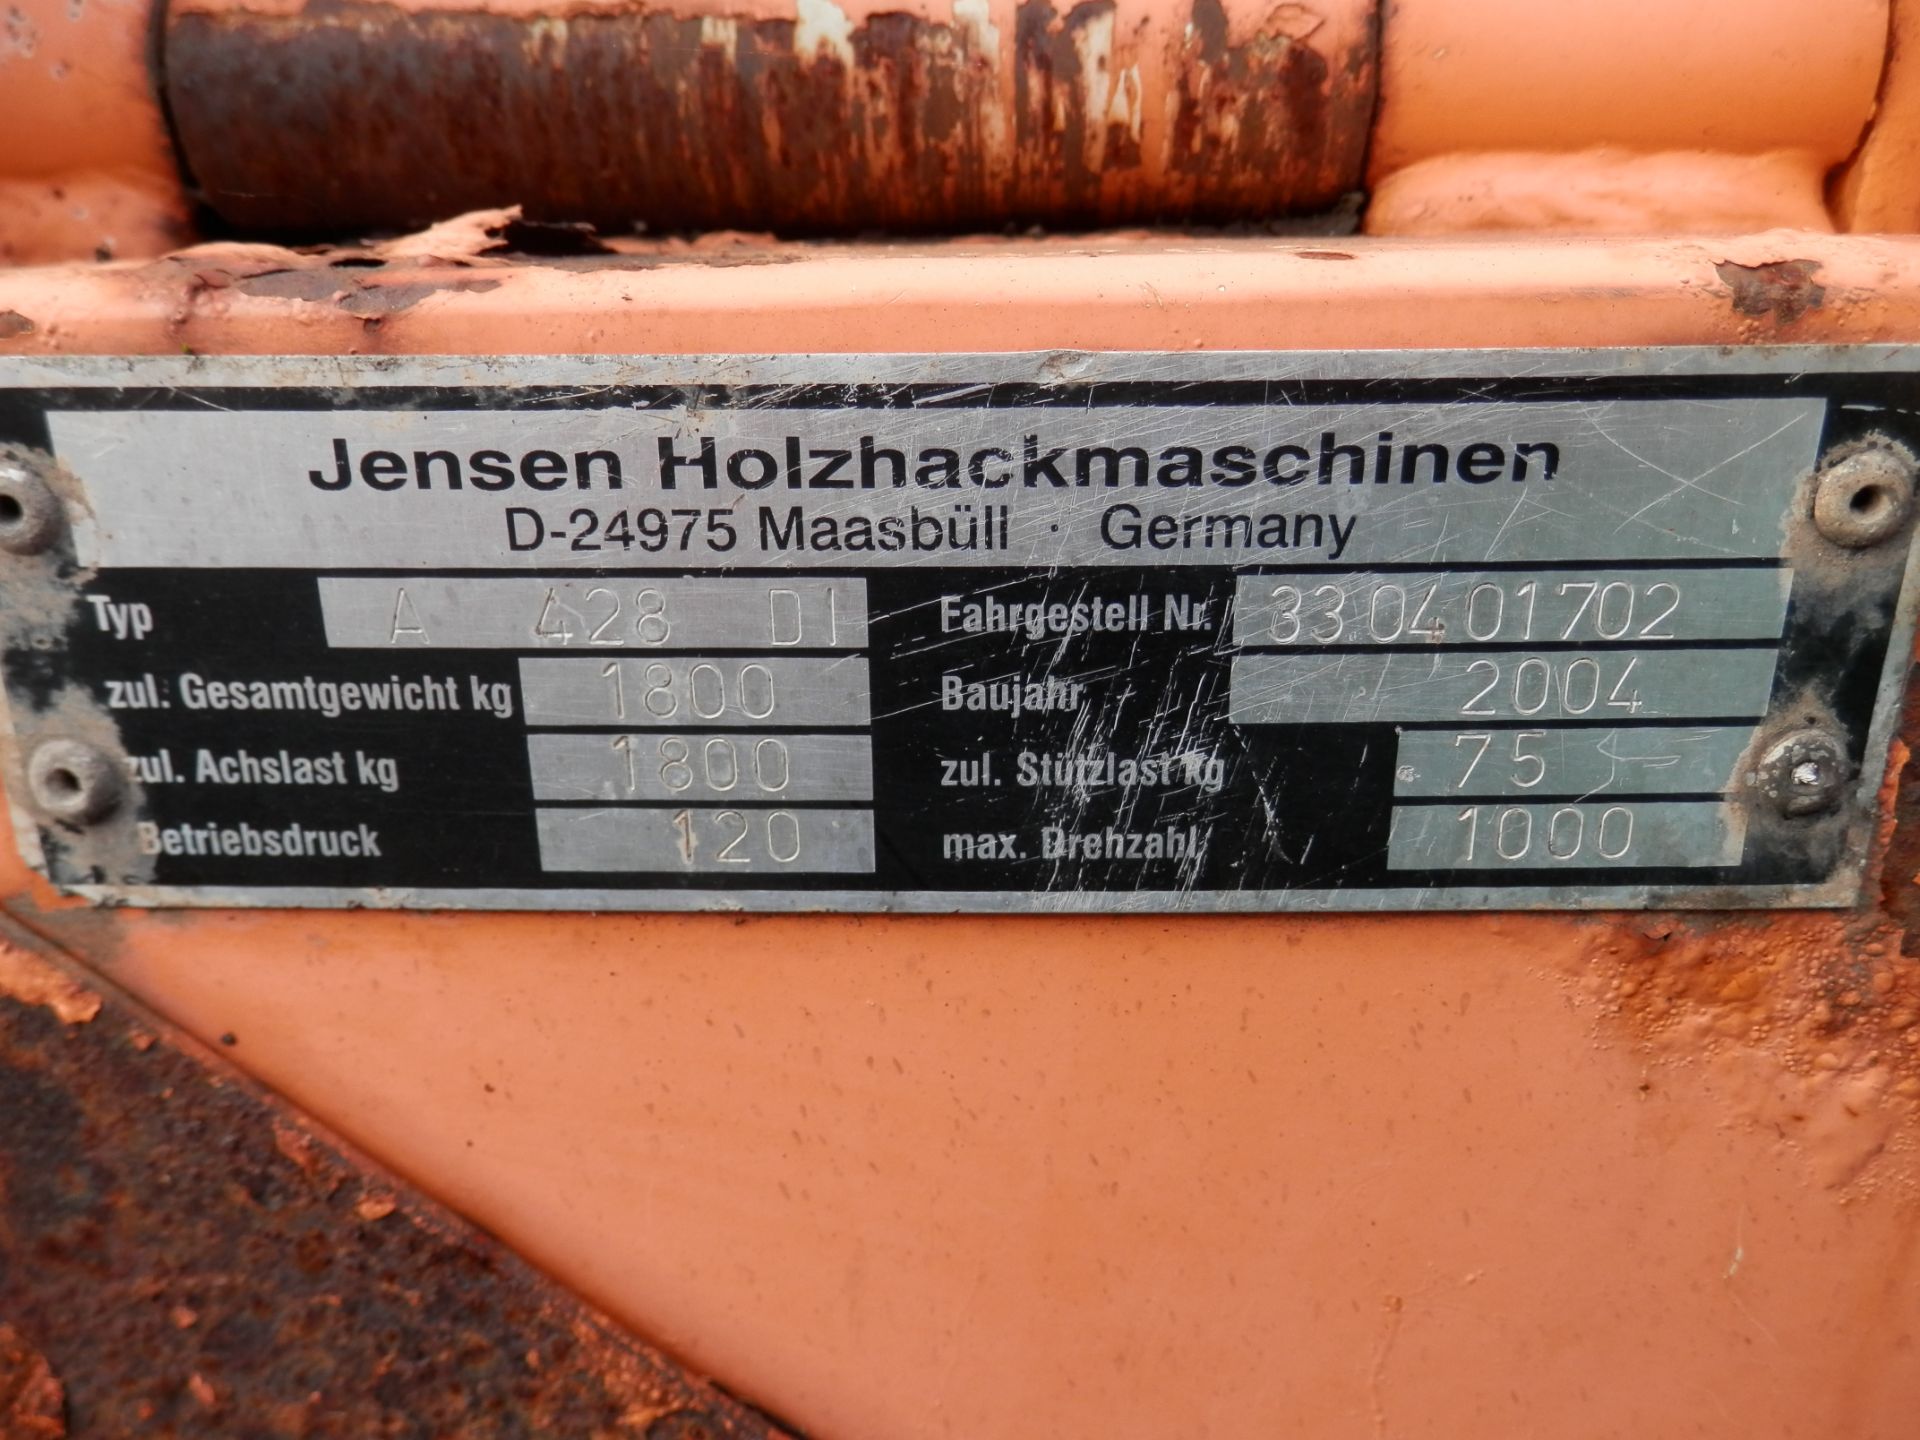 QUALITY 2004 JENSEN DIESEL TURNTABLE CHIPPER, GOOD WORKING ORDER - Image 3 of 9